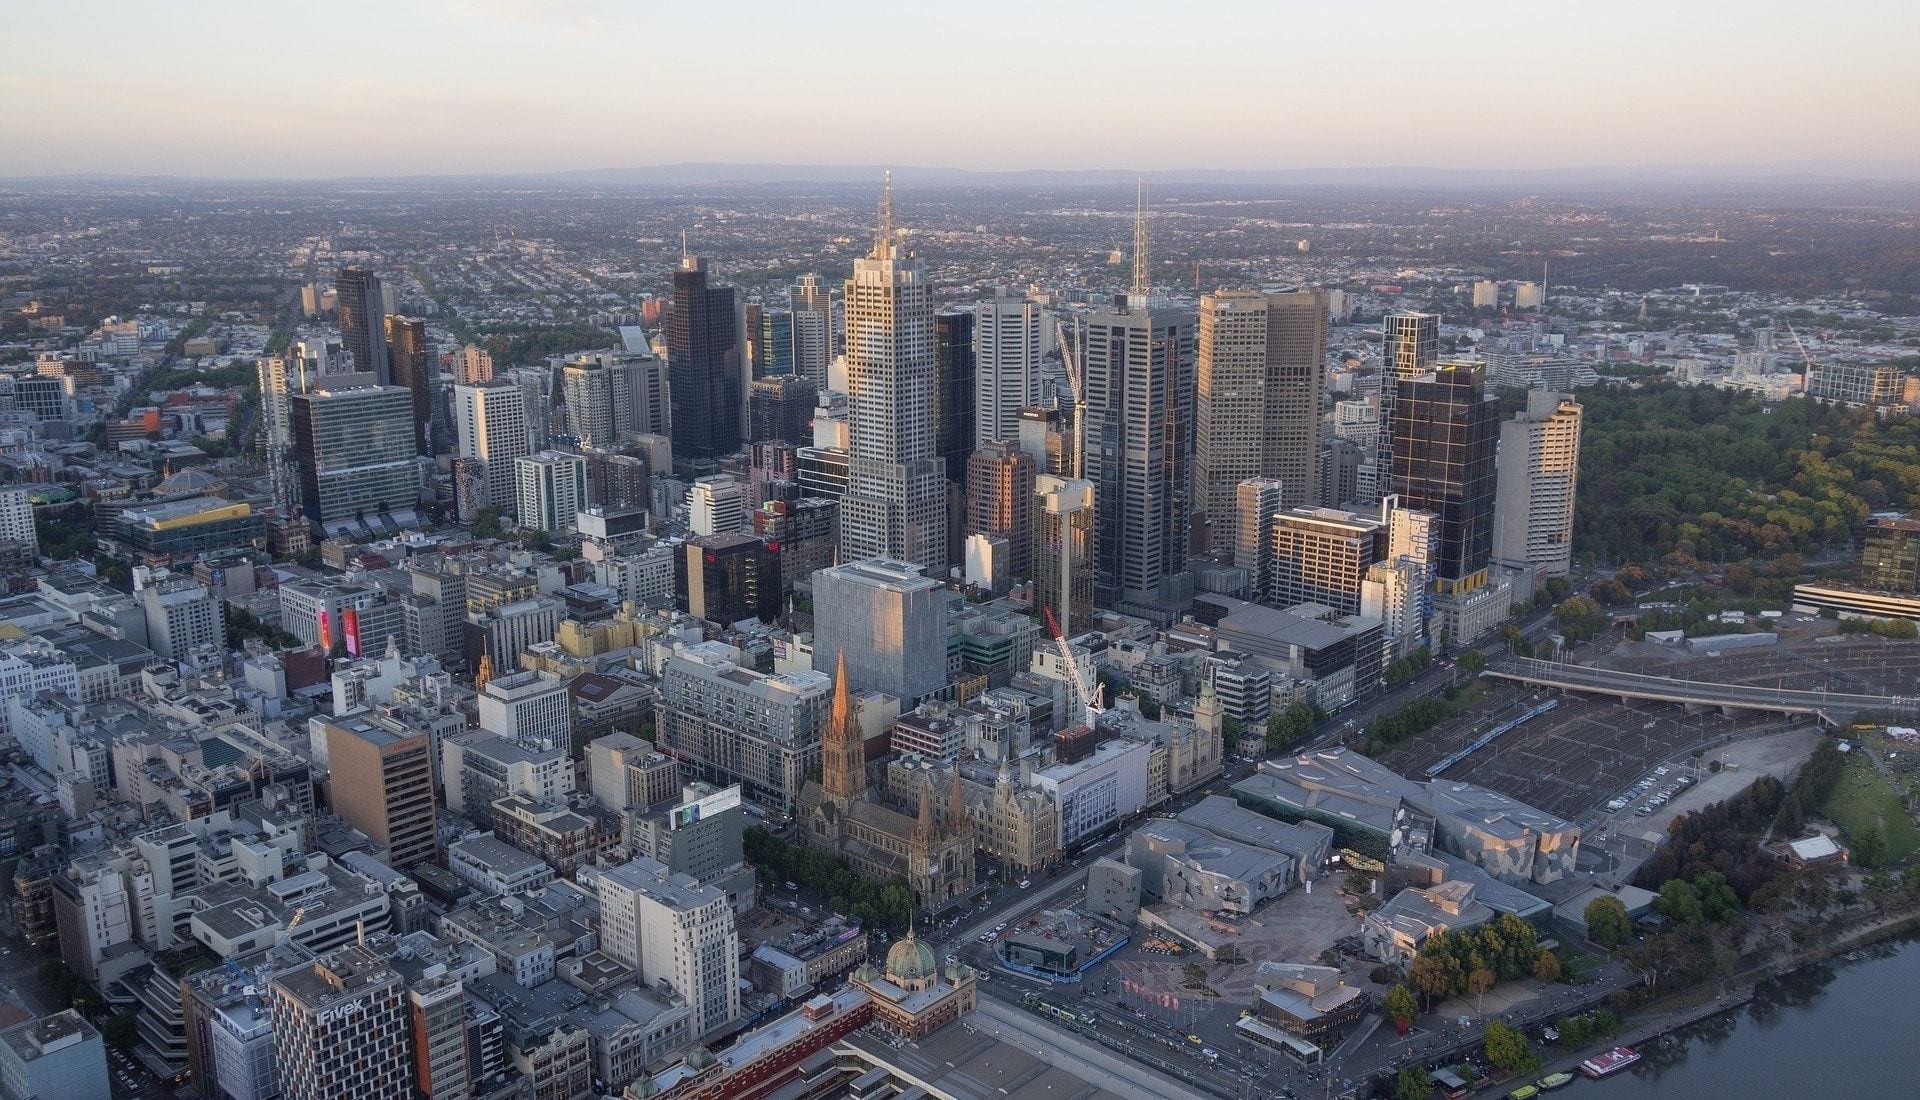 Melbourne from up above